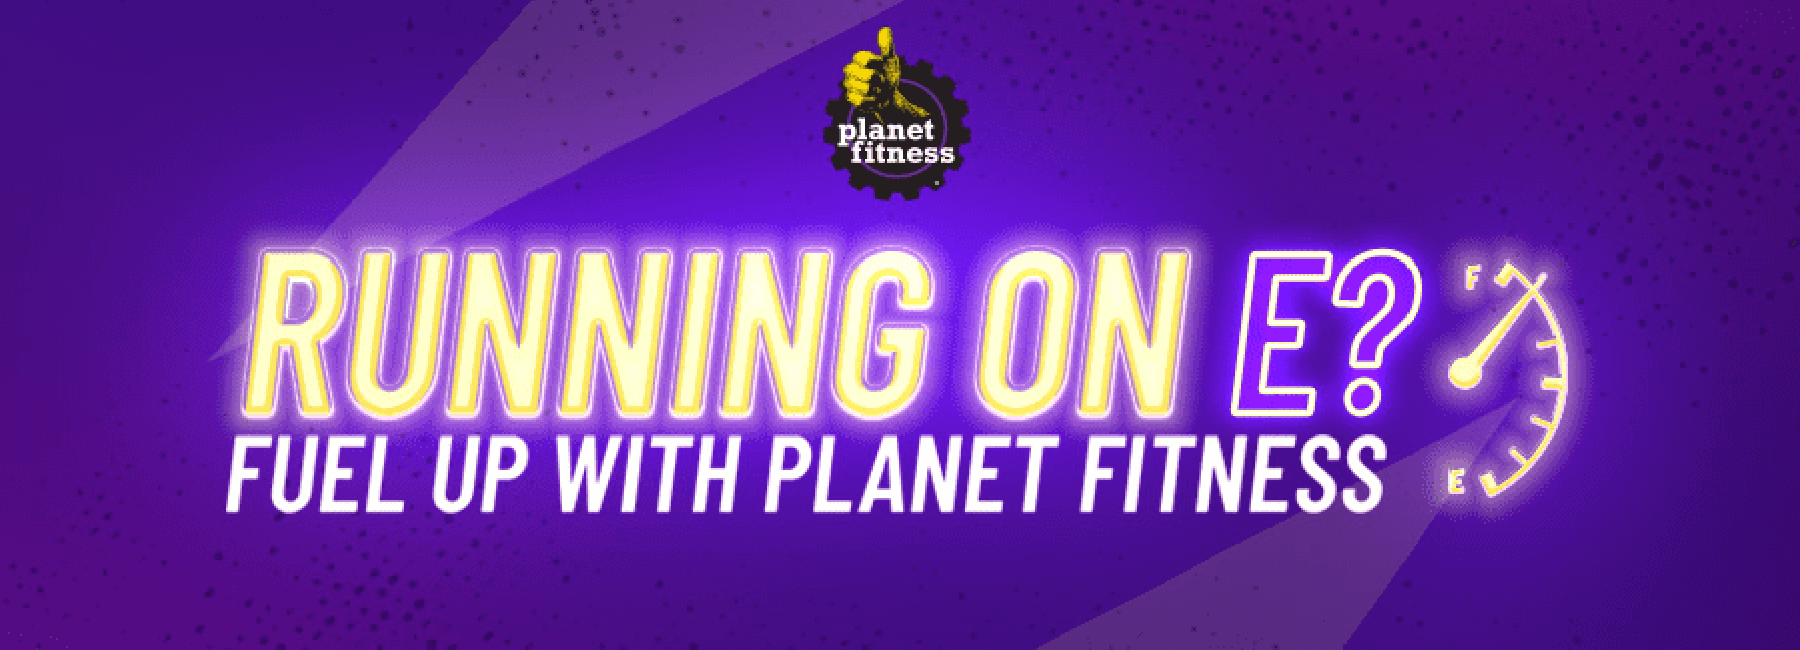 Save on fuel. Focus on fitness.  Thanks to our new partnership with Shell,  it's easy to get to the gym! Planet Fitness members can now fuel up like  race car legend